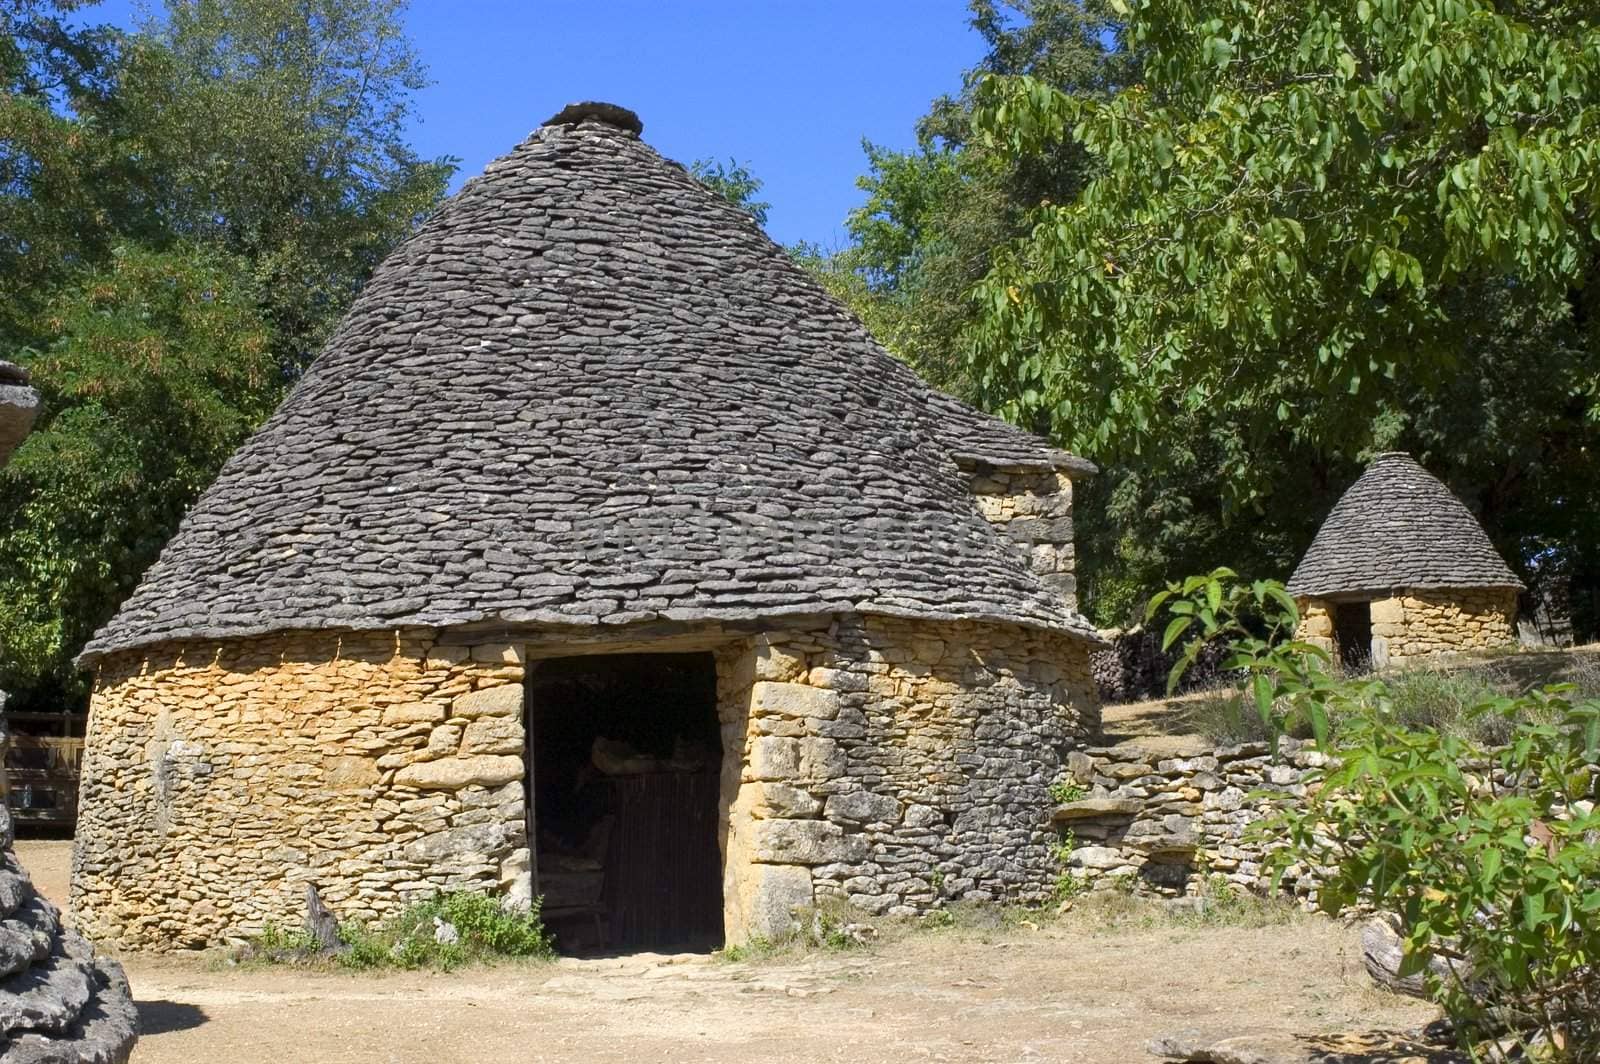 The word borie was introduced into Perigord in the years 1970. The term authentically from P�rigueux is Cabane. Boria� meaning cattle shed to beef animals in langue d'oc, the borie would correspond more to one small smallholding.